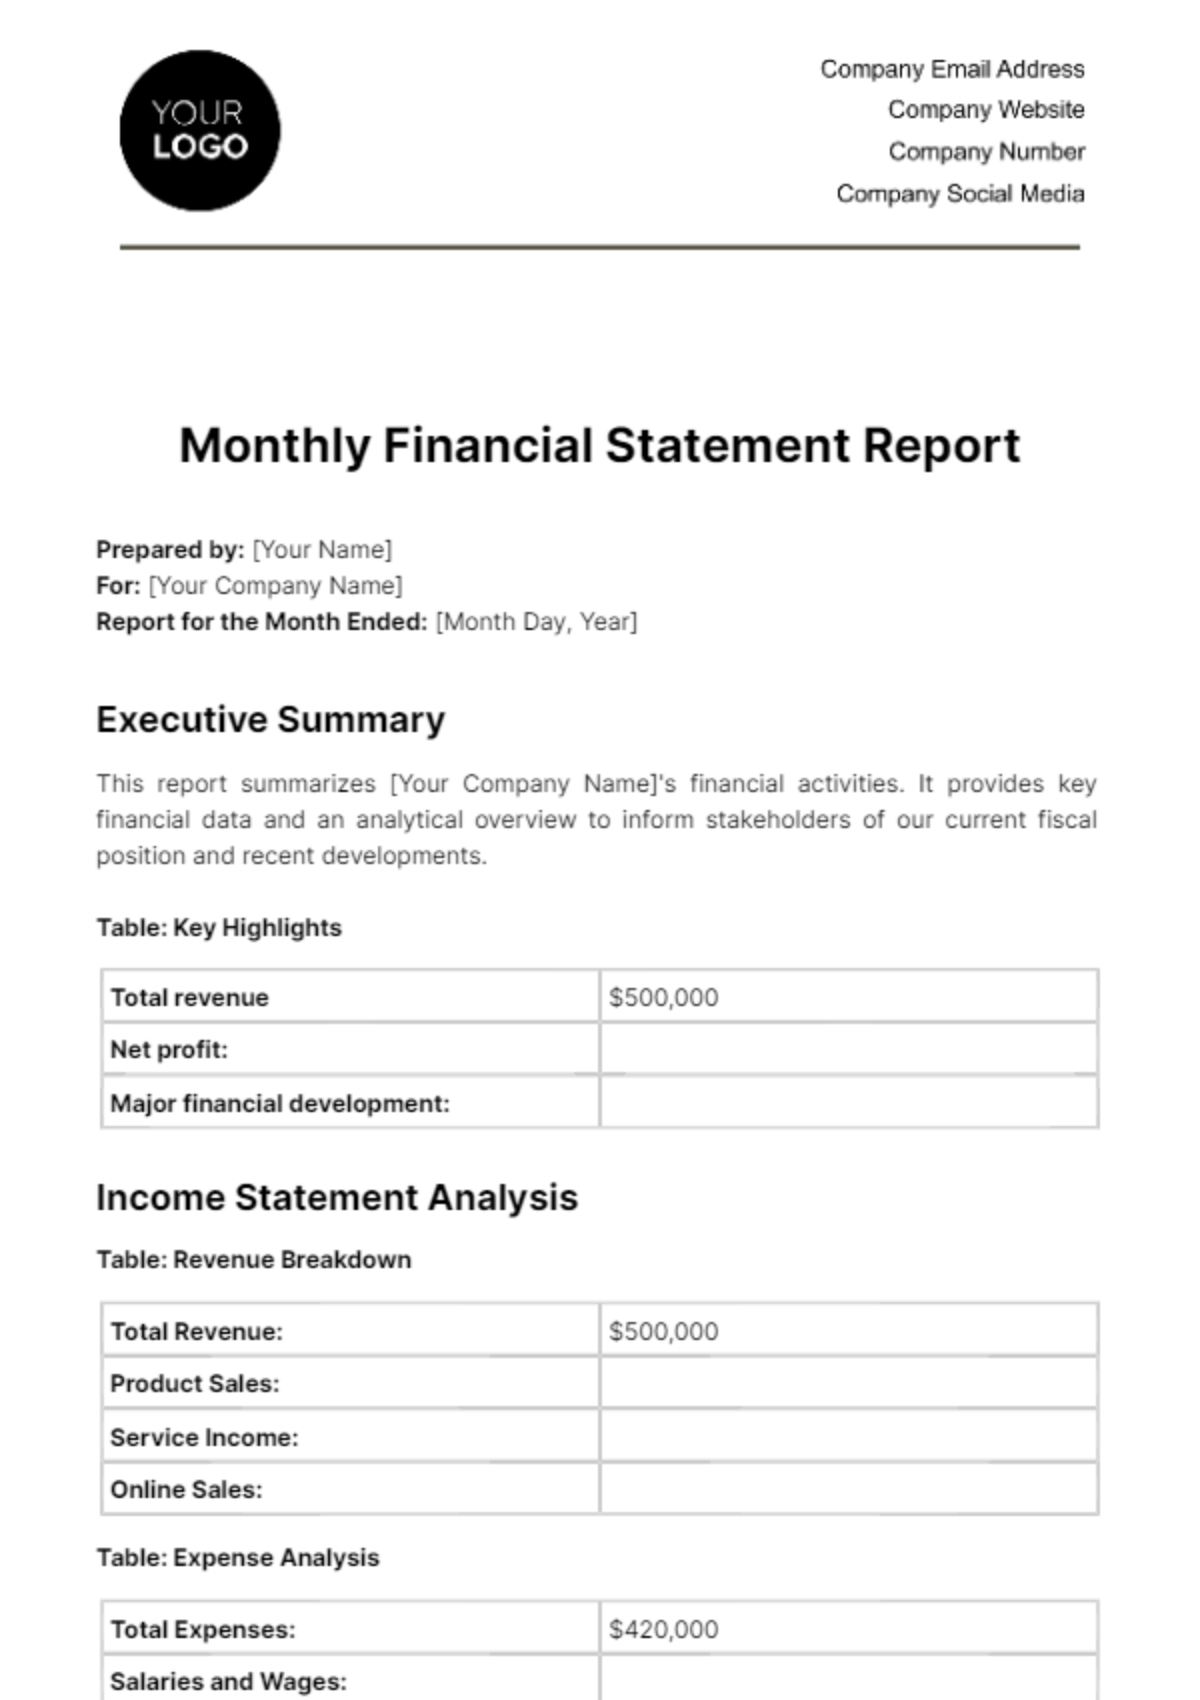 Free Monthly Financial Statement Report Template